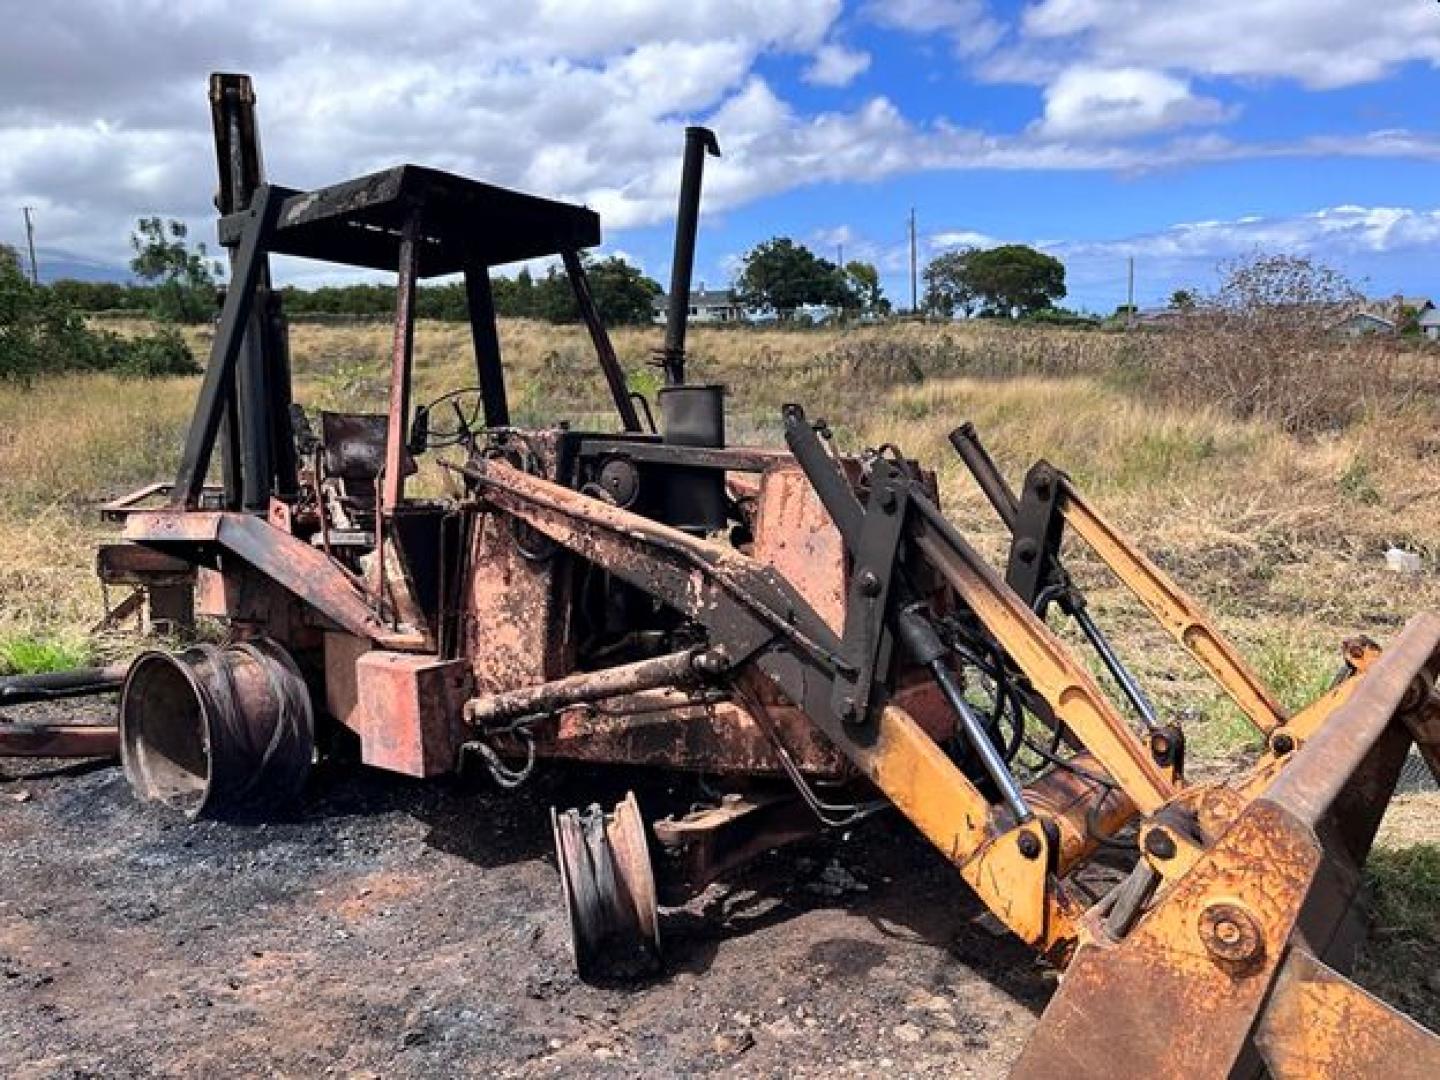 A photo of the charred frame of a tractor.